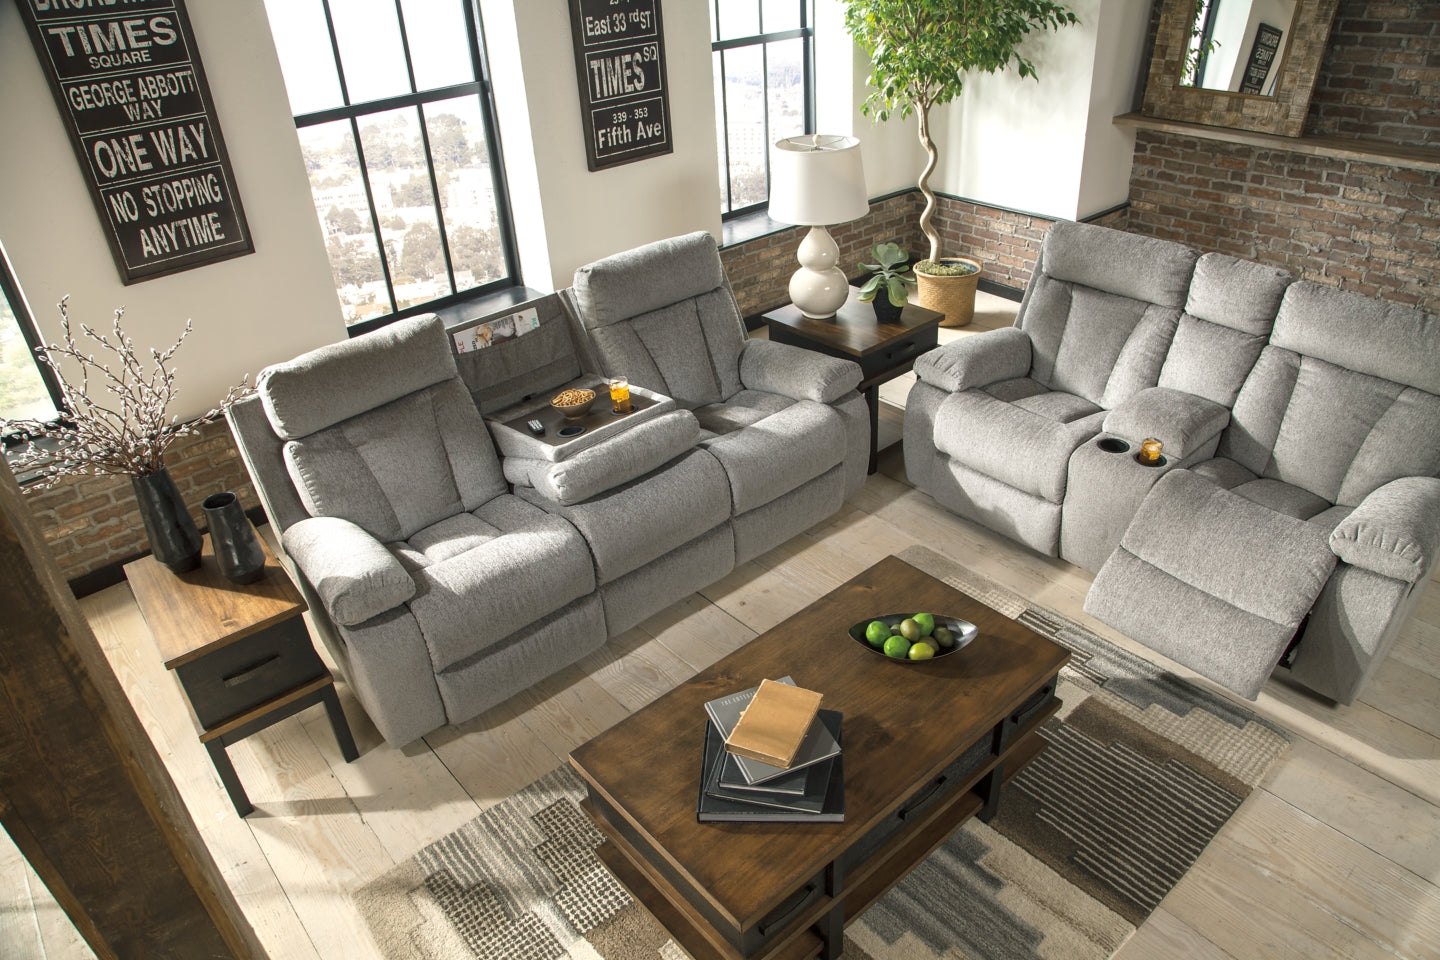 Mitchiner Reclining Sofa with Drop Down Table - The Bargain Furniture